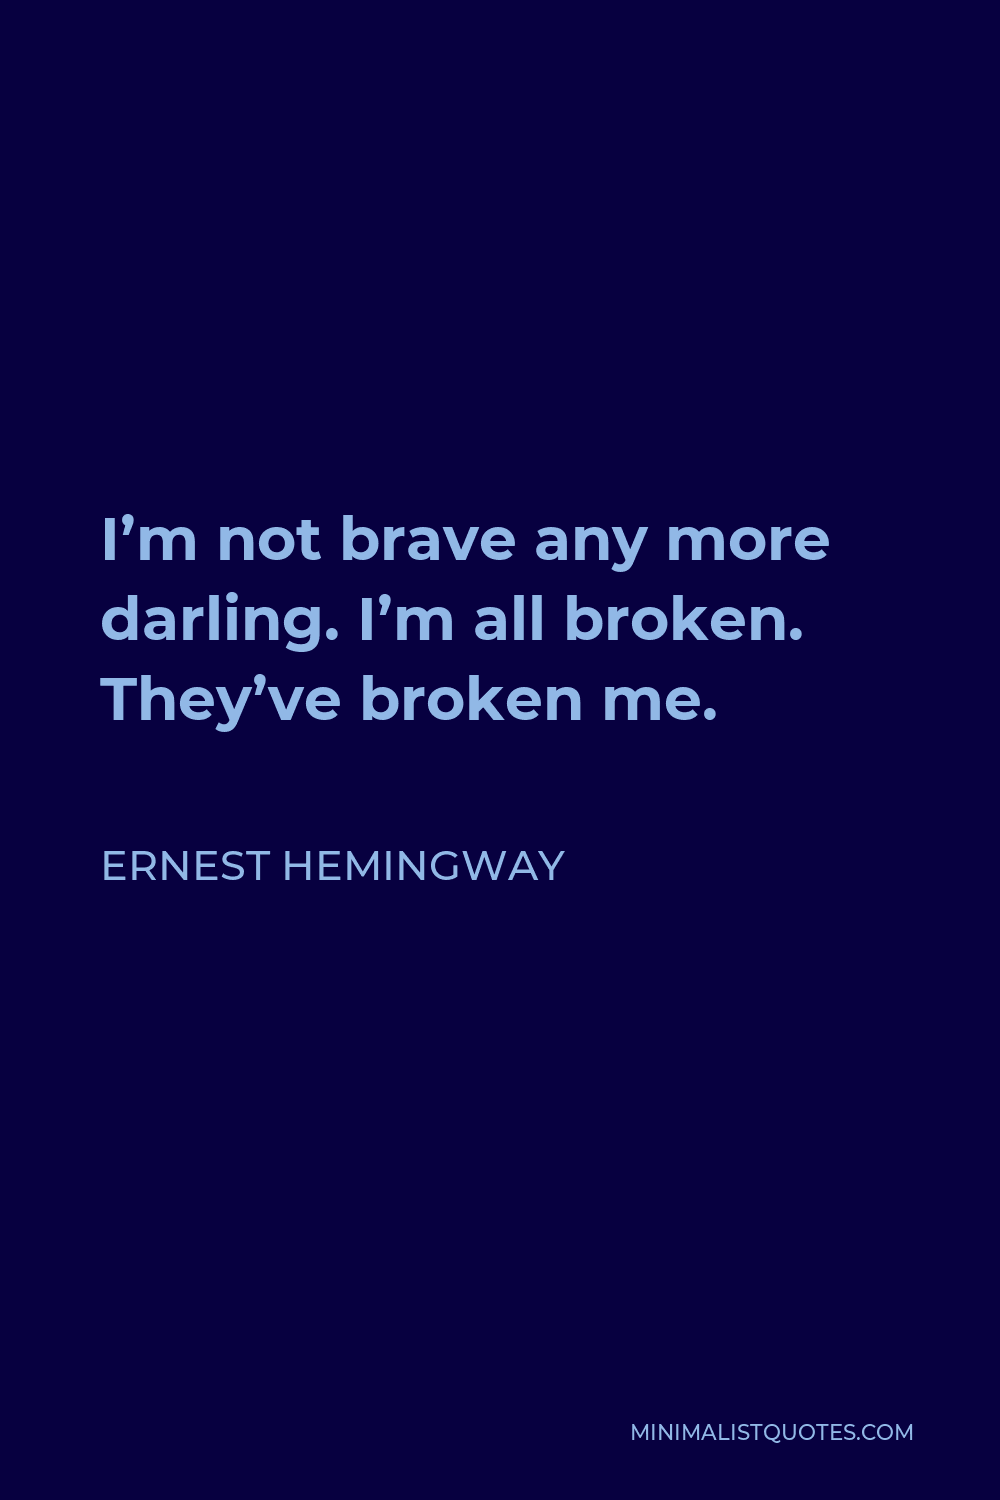 Ernest Hemingway Quote - I’m not brave any more darling. I’m all broken. They’ve broken me.